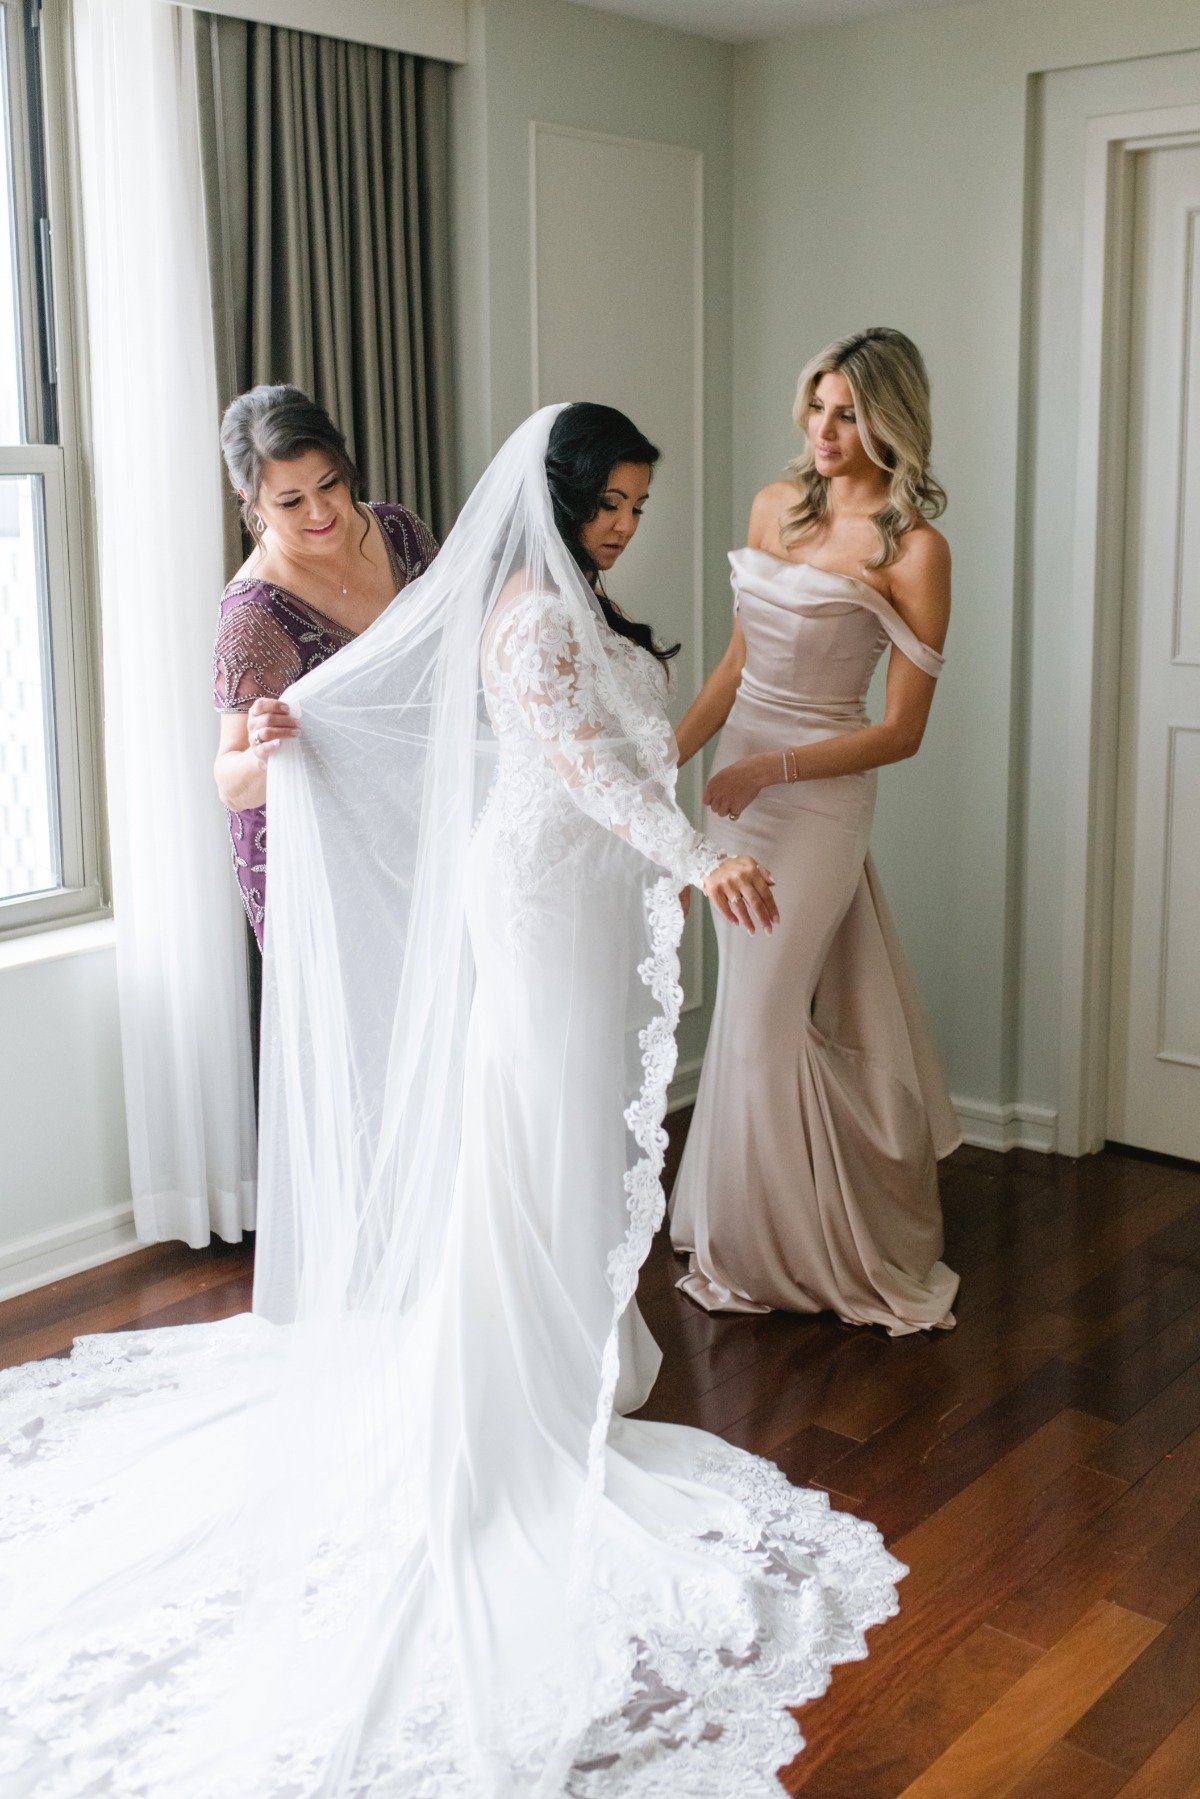 Bride's mother and bridesmaid adjusting dress and veil